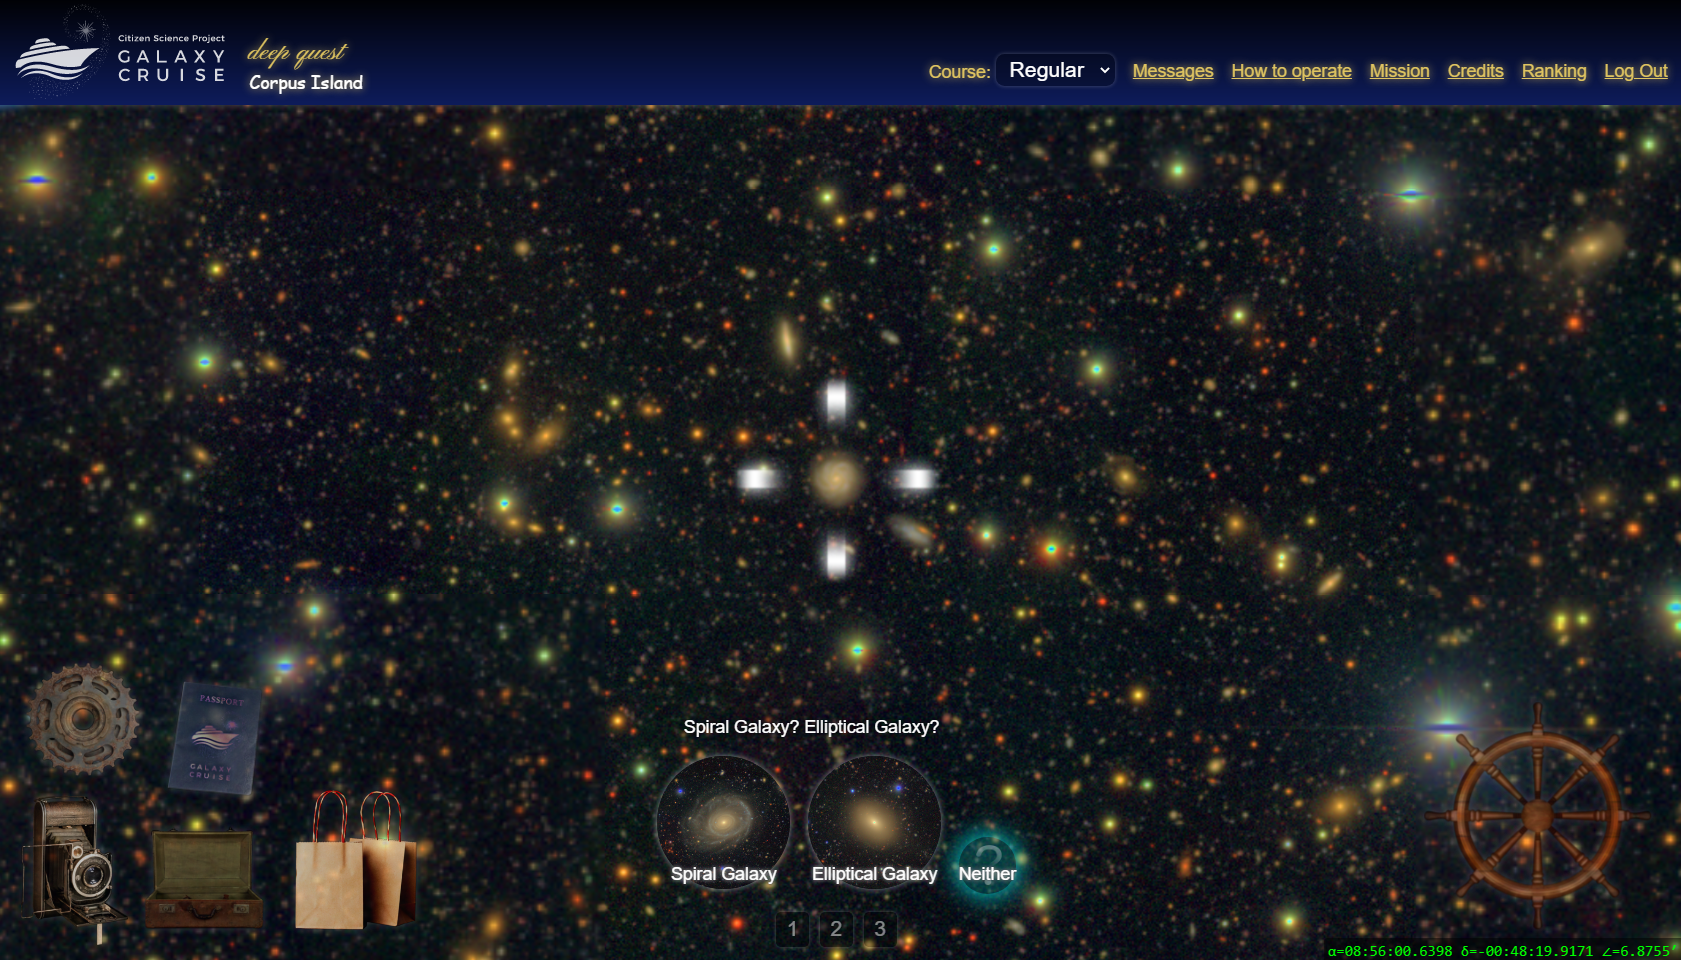 citizen science project Galaxy Cruise asks volunteers to classify galaxies